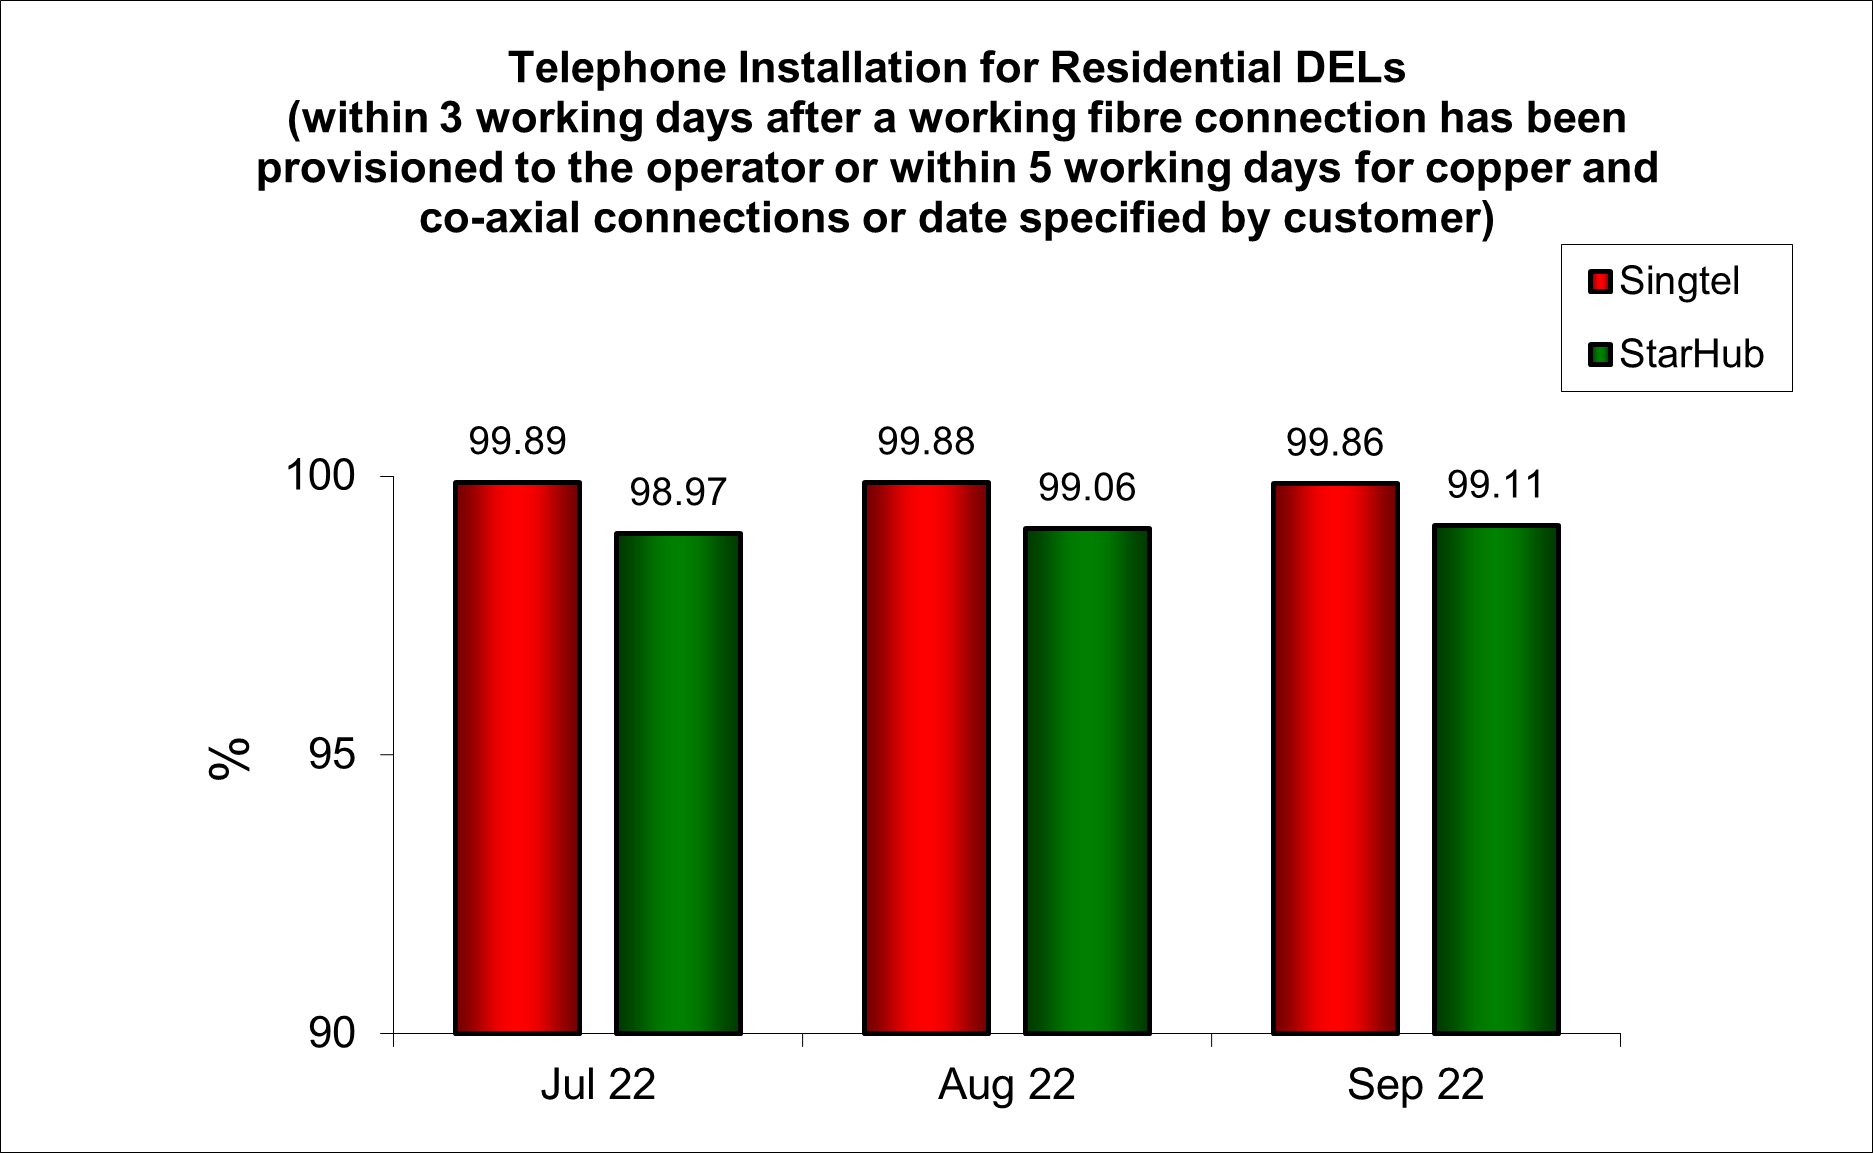 Telephone Installation for Residential DELs in Singapore Q3 2022